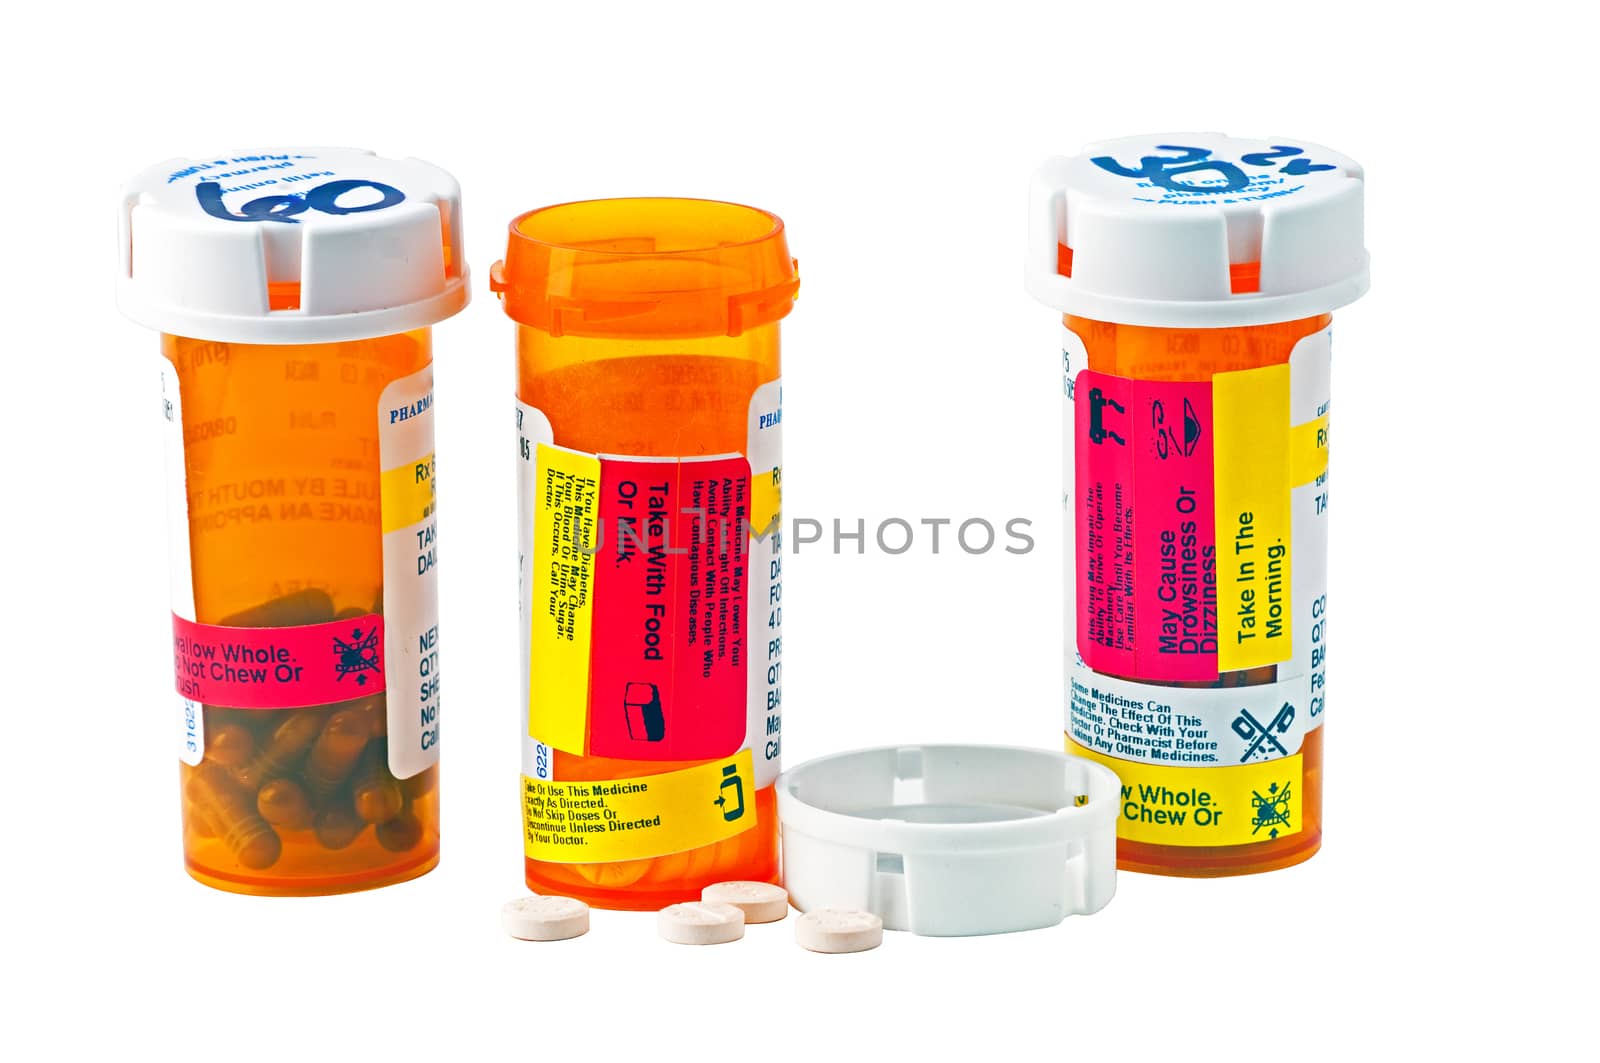 Three bottles of medicine with child proof caps